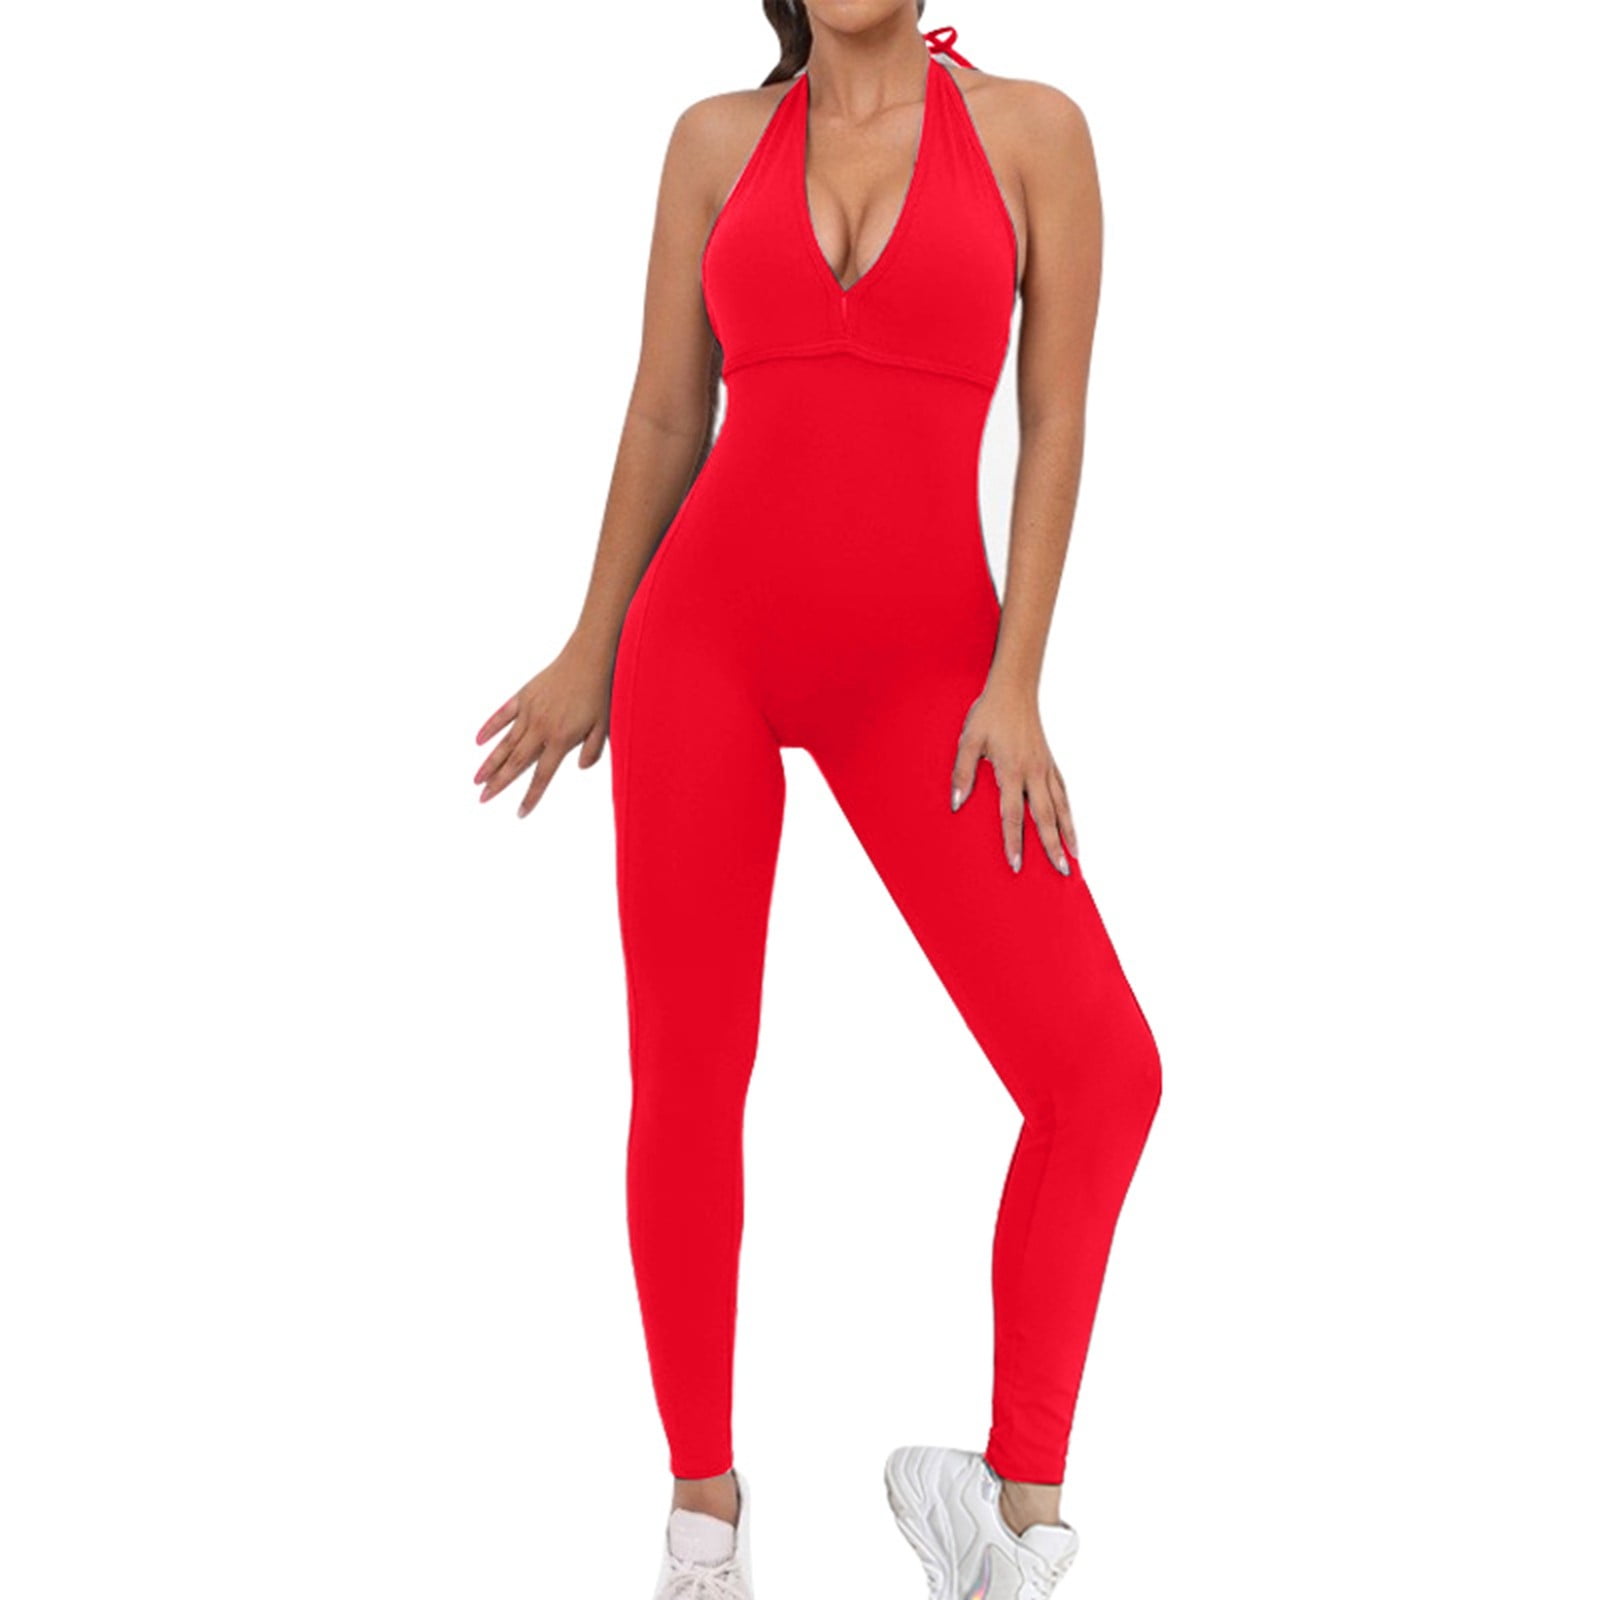 GDREDA Unitard Jumpsuits For women's Yoga Suit Tight Breathable Peach ...